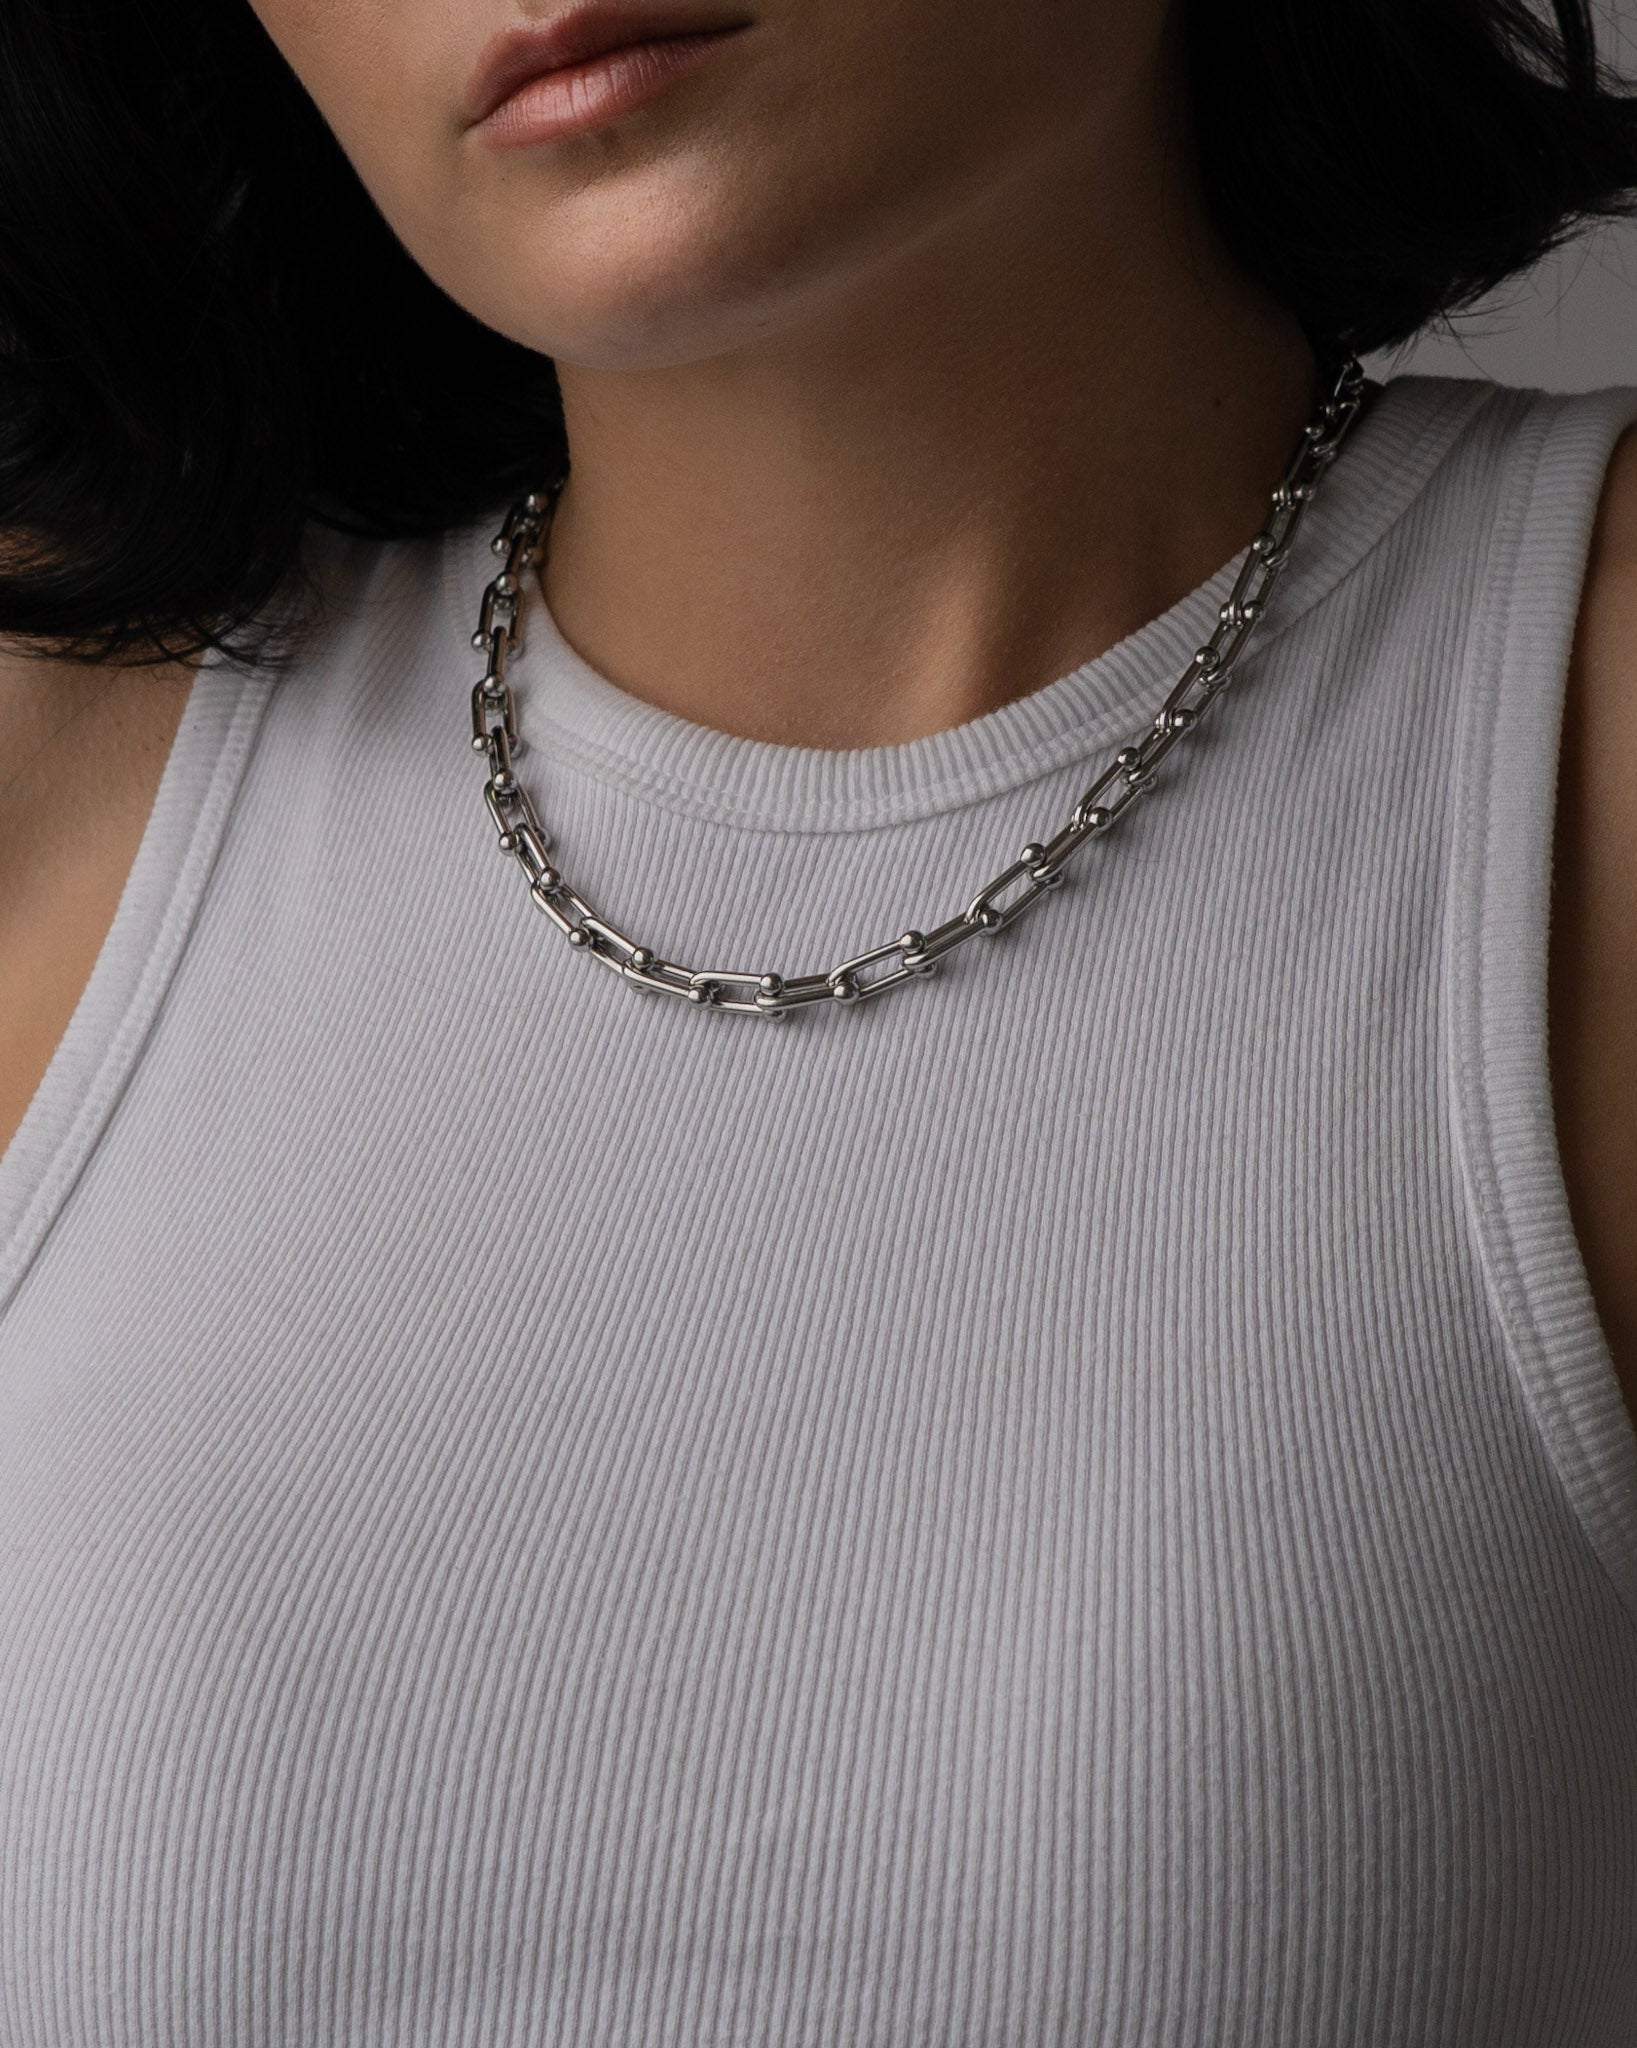 Sepik women's necklace by Five Jwlry, designed with a 5mm U-shape horseshoe buckle chain in silver-colored, water-resistant 316L stainless steel. Available in sizes 45cm and 50cm. Hypoallergenic with a 2-year warranty.